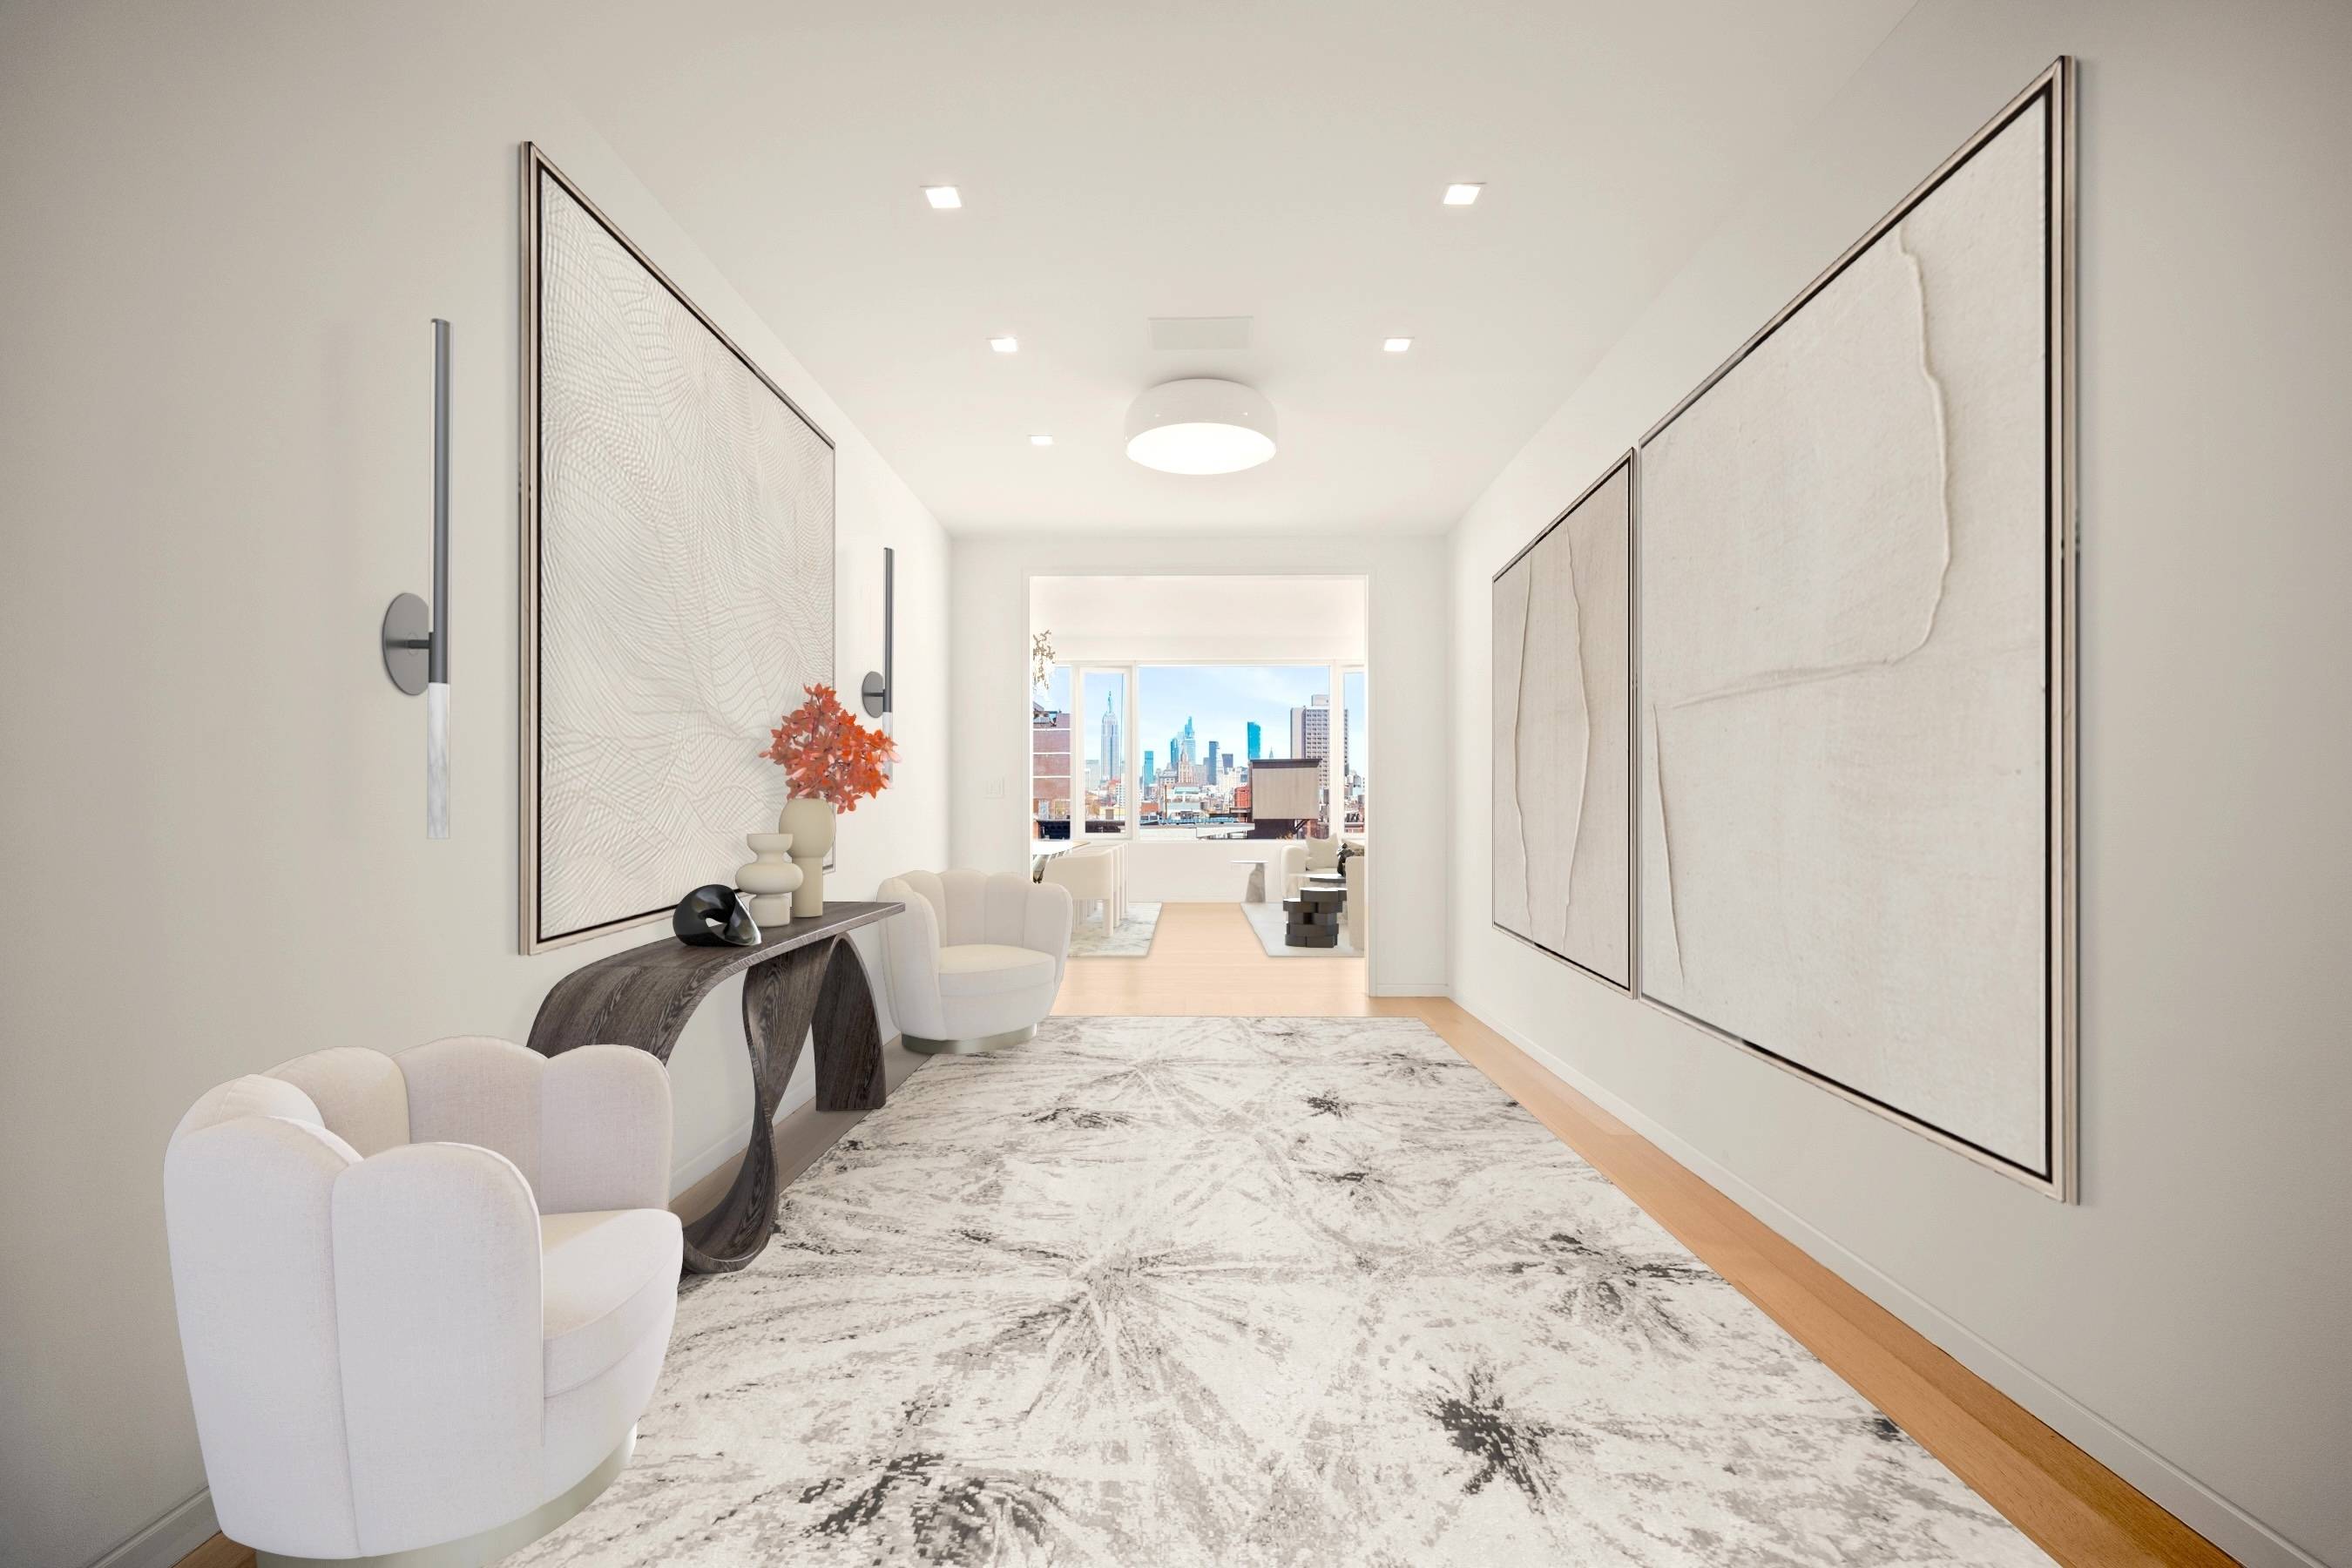 Experience the epitome of urban luxury living at this prestigious downtown address, crafted by the esteemed architectural talents of Moed de Armas amp ; Shannon, and meticulously curated by renowned ...